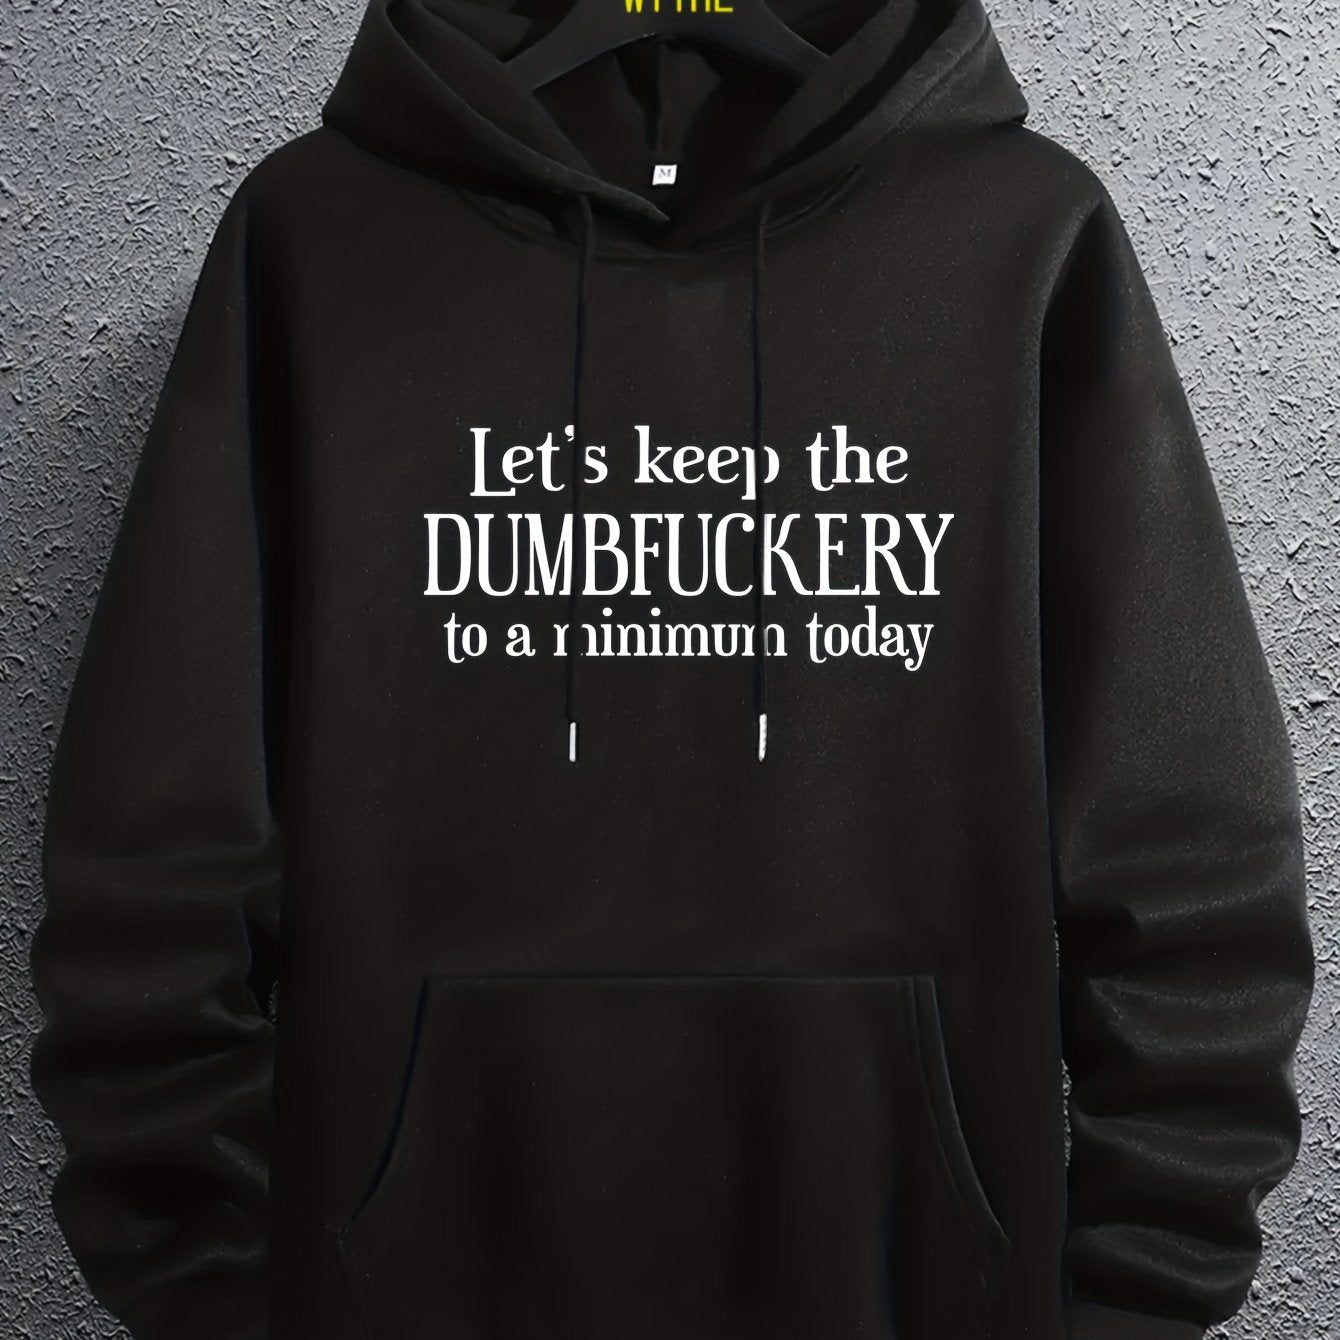 DUMFUCKERY Print Hoodies For Men, Graphic Hoodie With Kangaroo Pocket, Comfy Loose Trendy Hooded Pullover, Mens Clothing For Autumn Winter